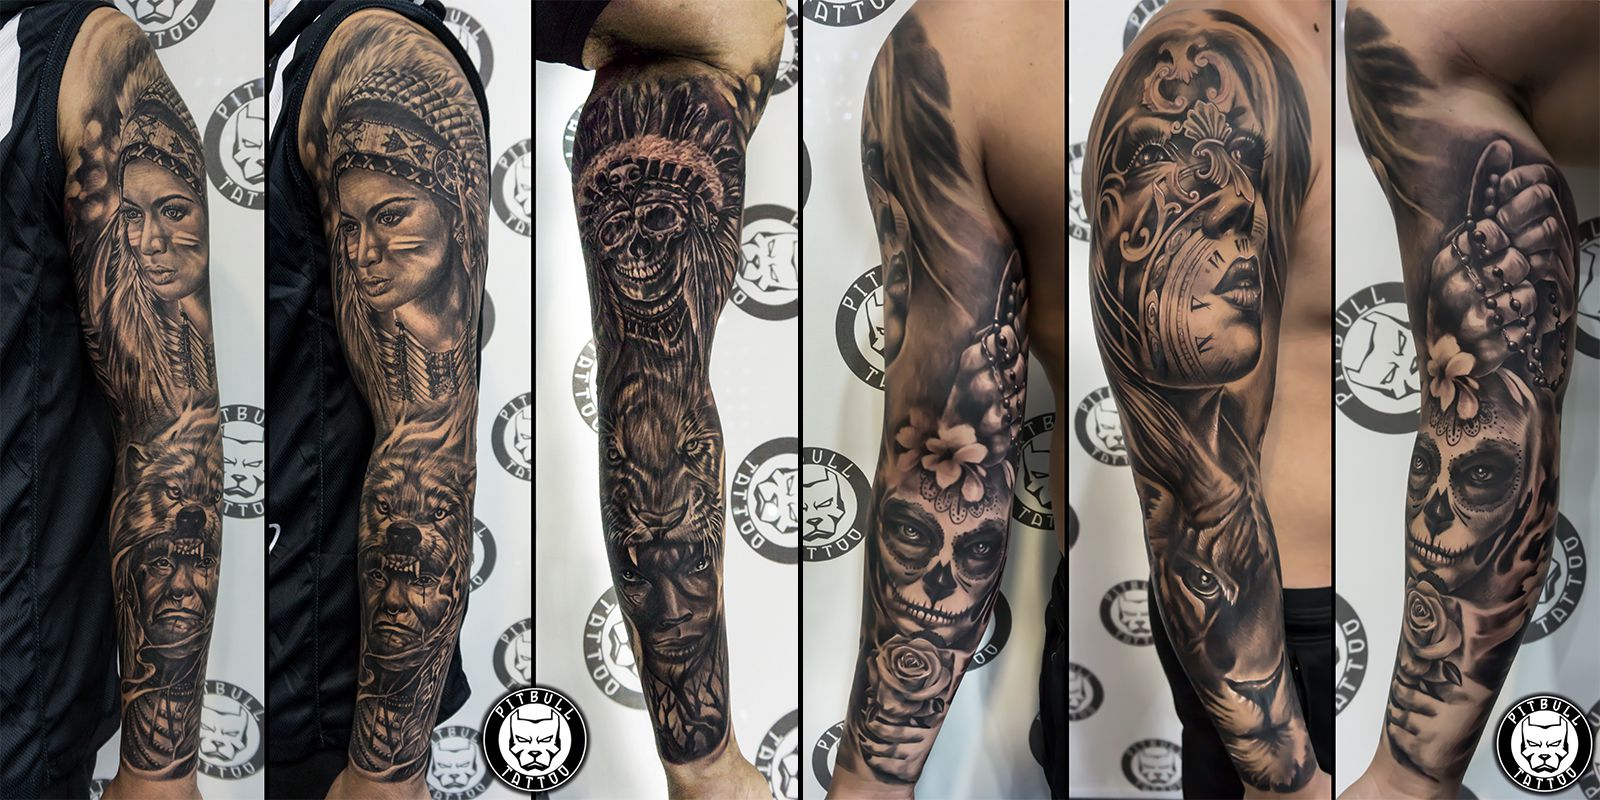 How to do black and gray tattoos